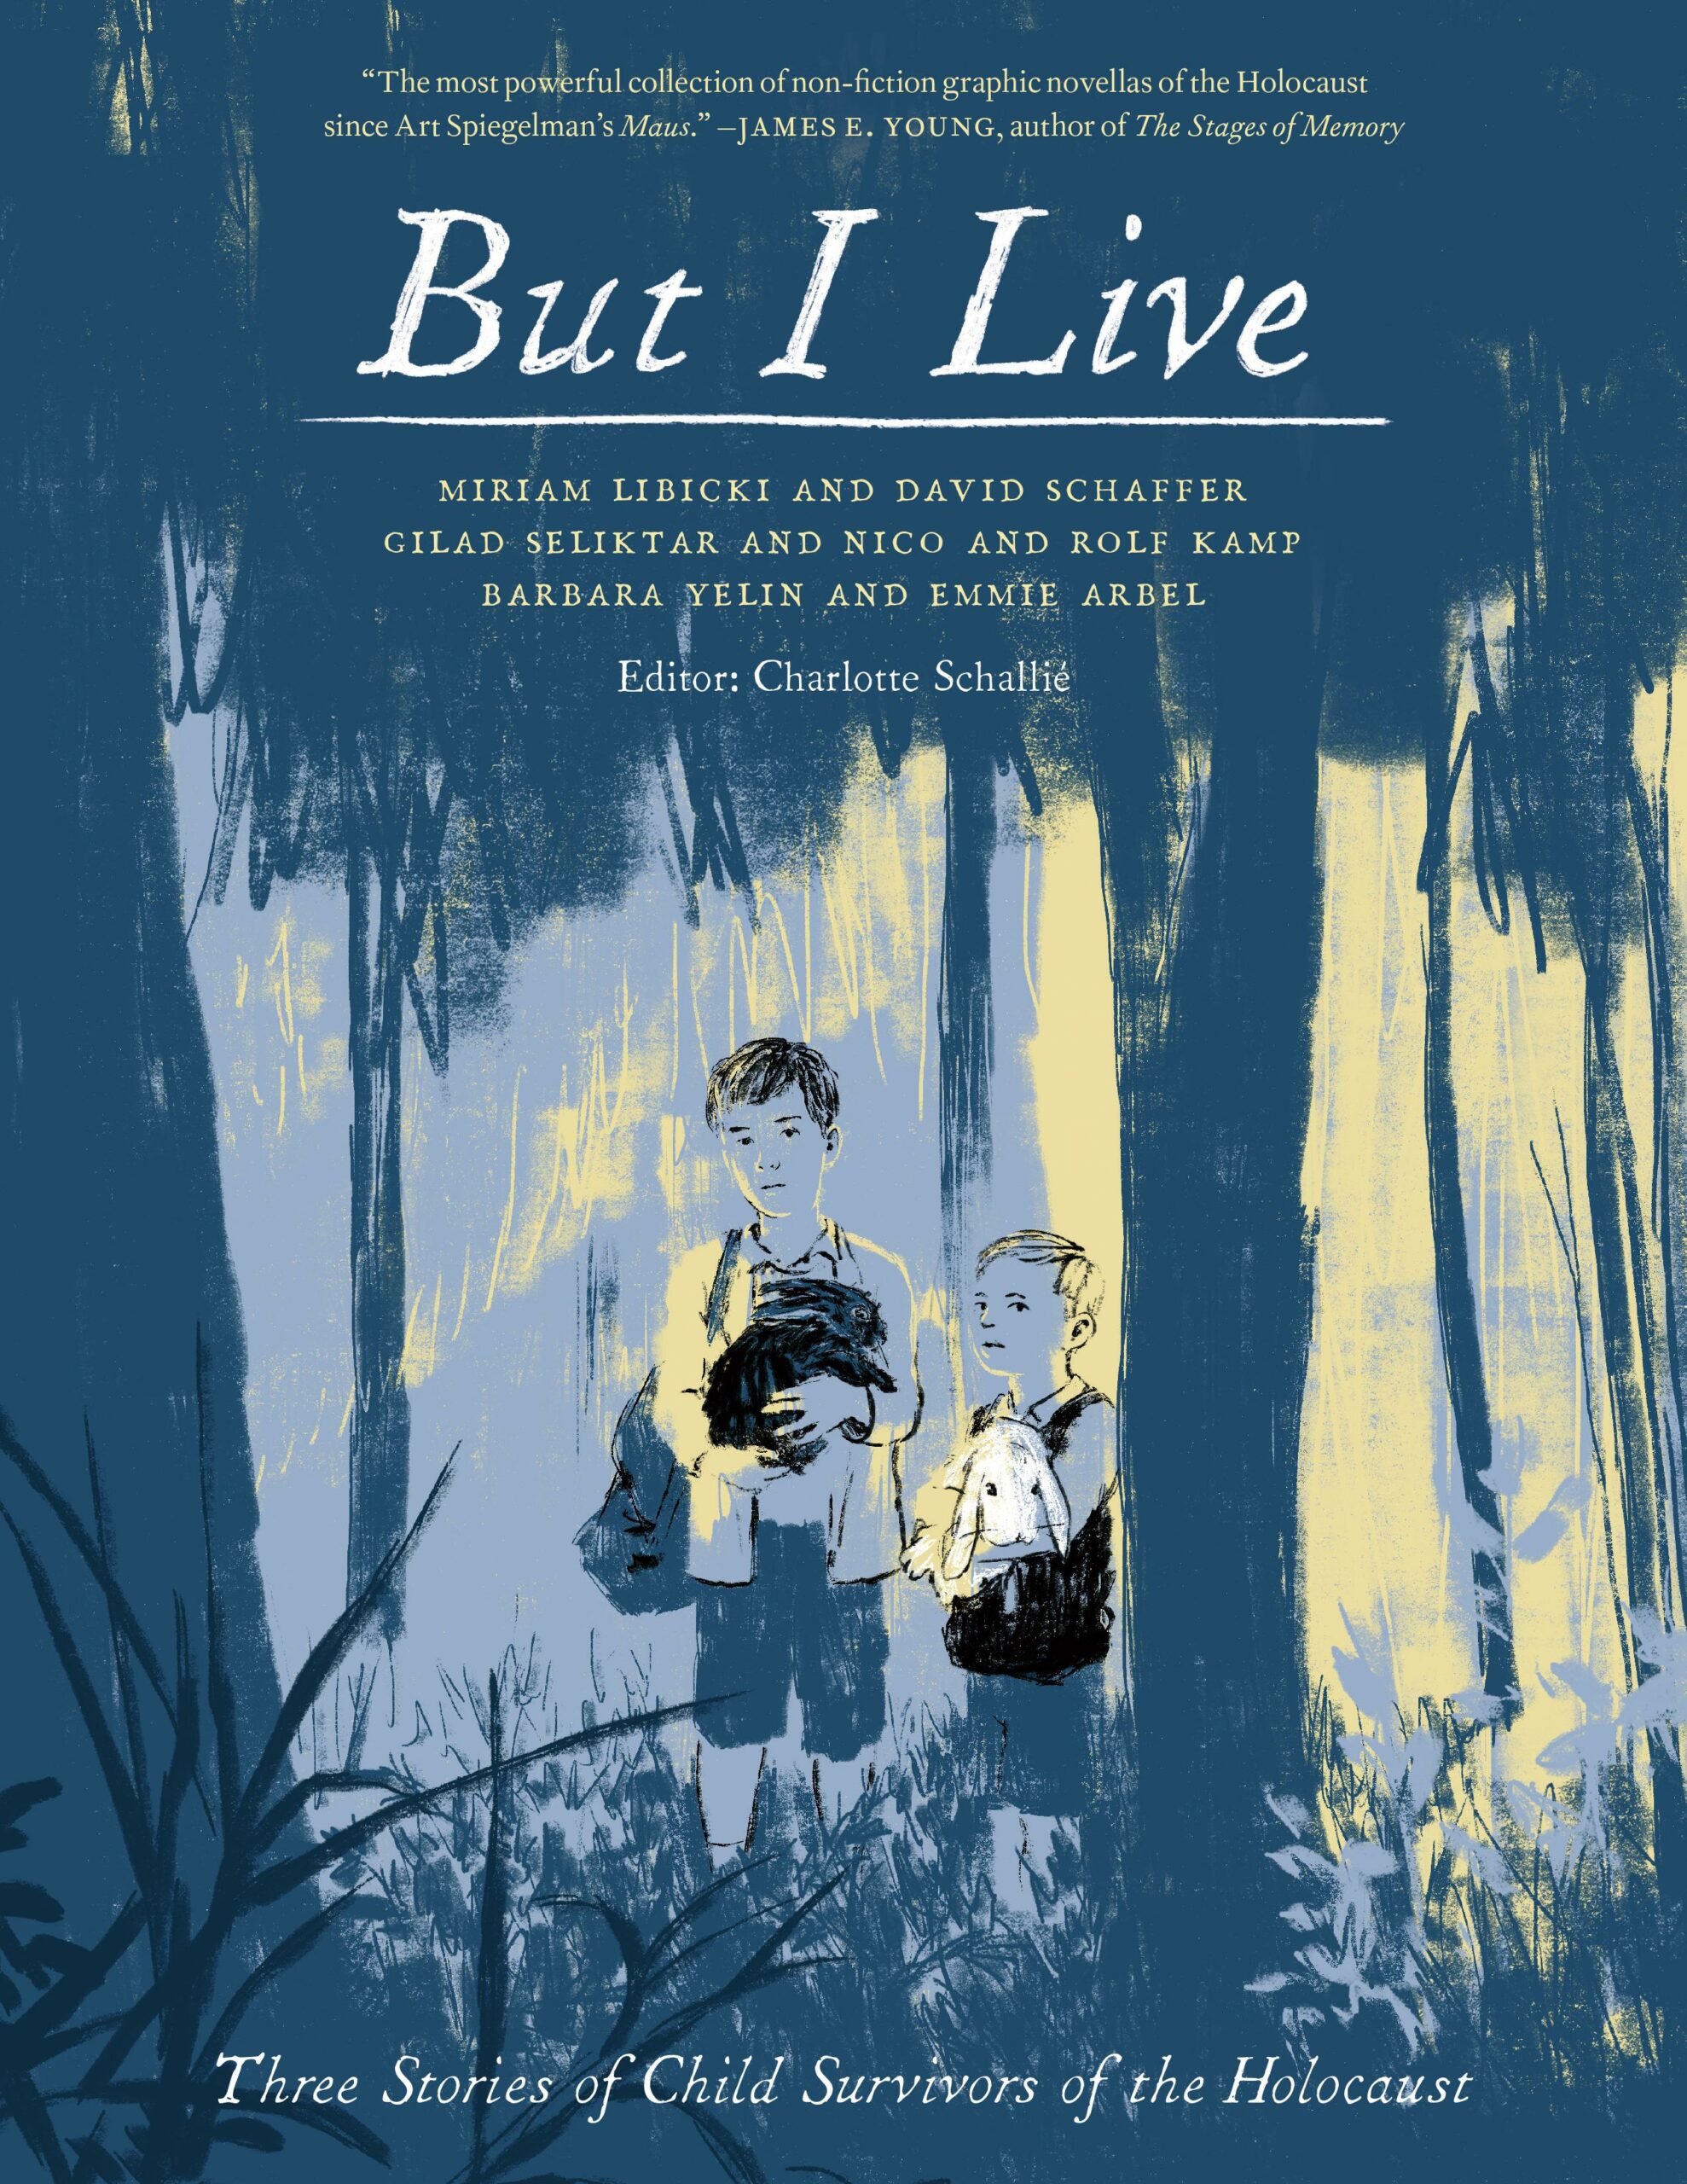 The cover of 'But I Live' by Barbara Yelin and Emmie Arbel